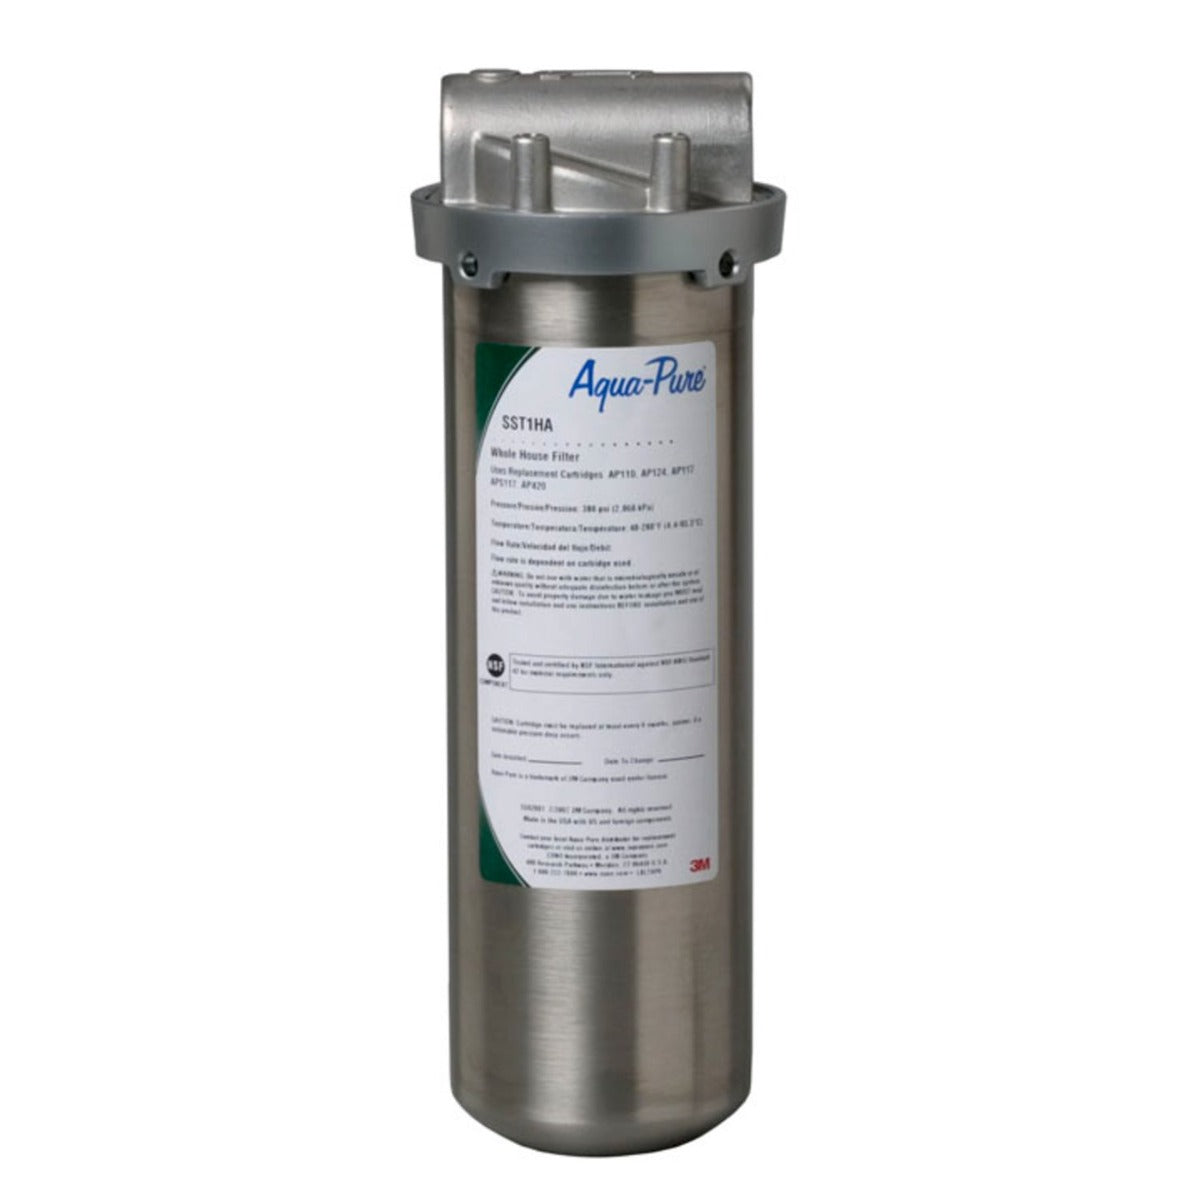 3M Aqua-Pure SST1HA Stainless Steel Housing Filtration System